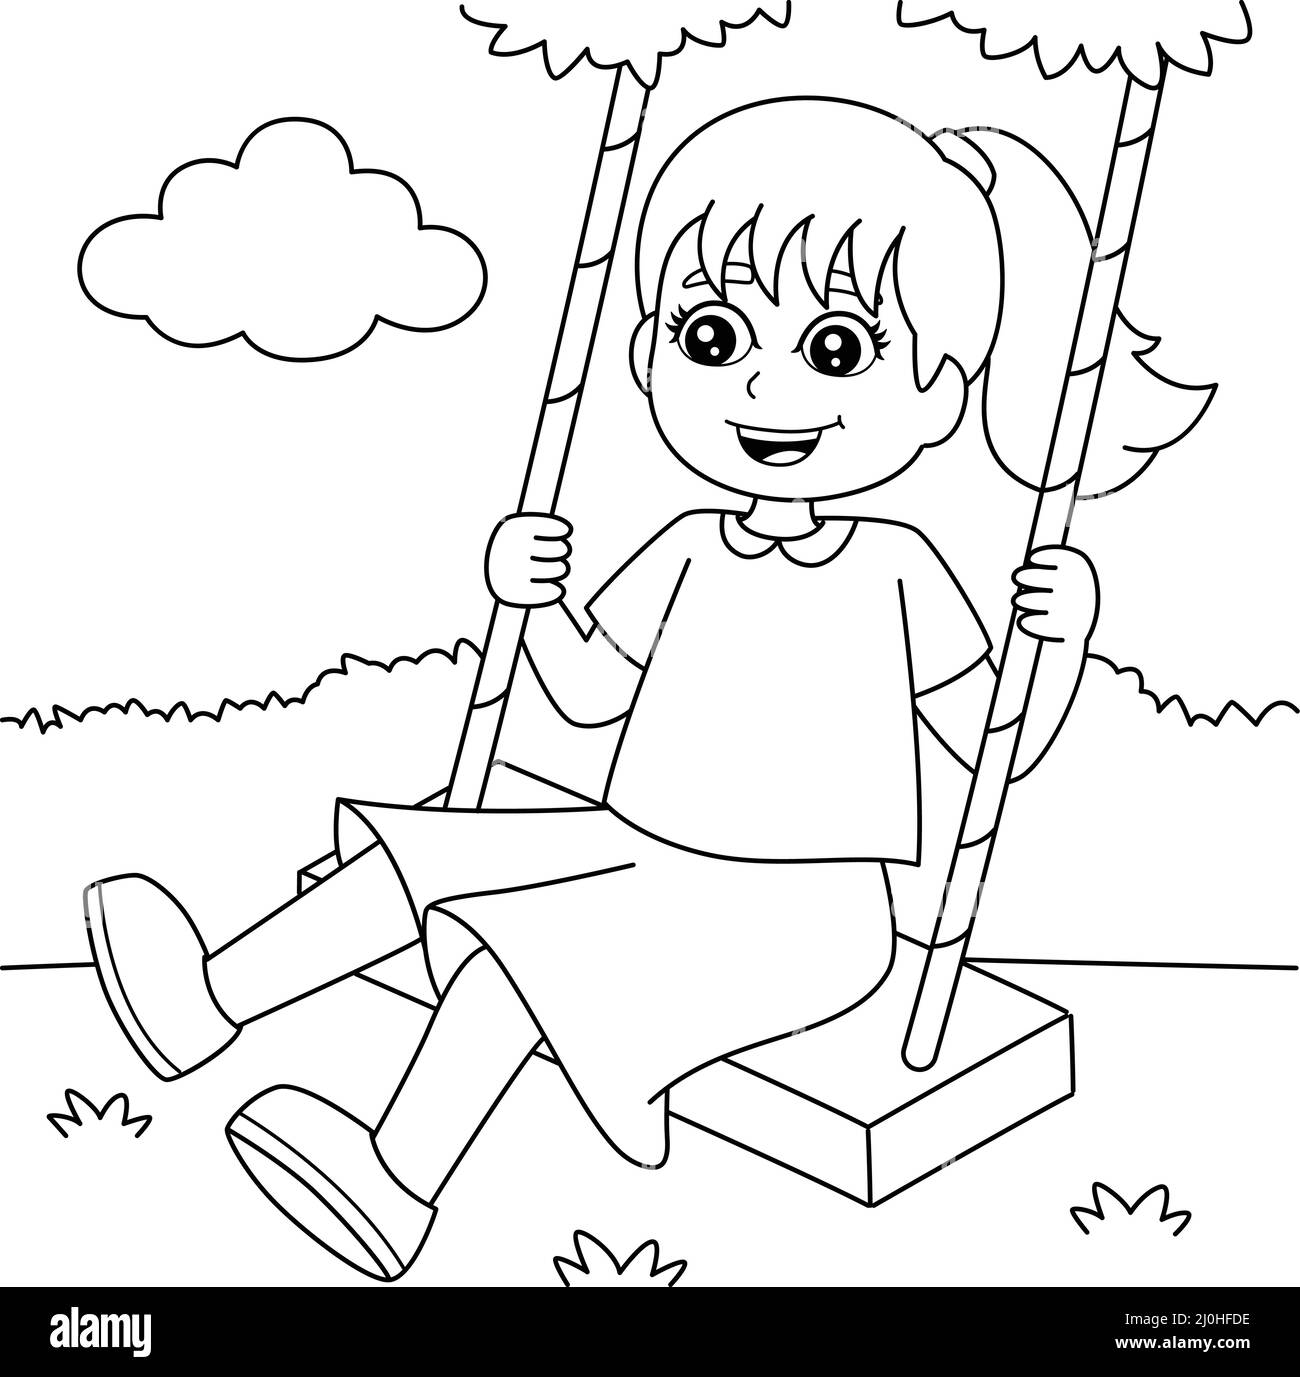 Girl On A Swing Coloring Page for Kids Stock Vector